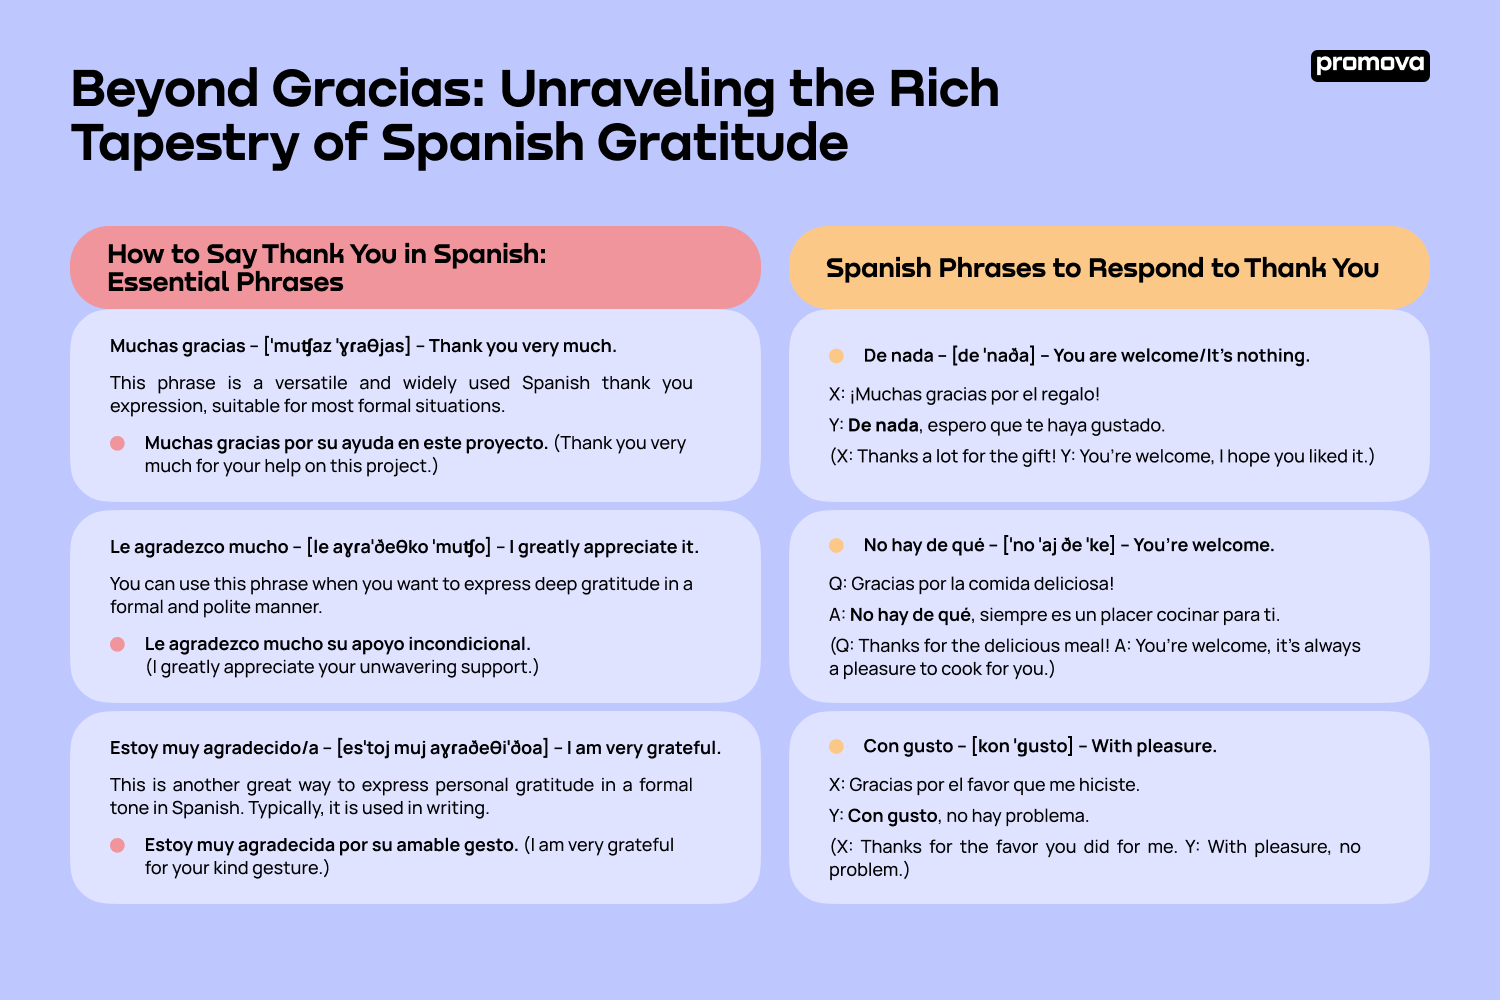 Discover Common Phrases to Say Thank You in Spanish